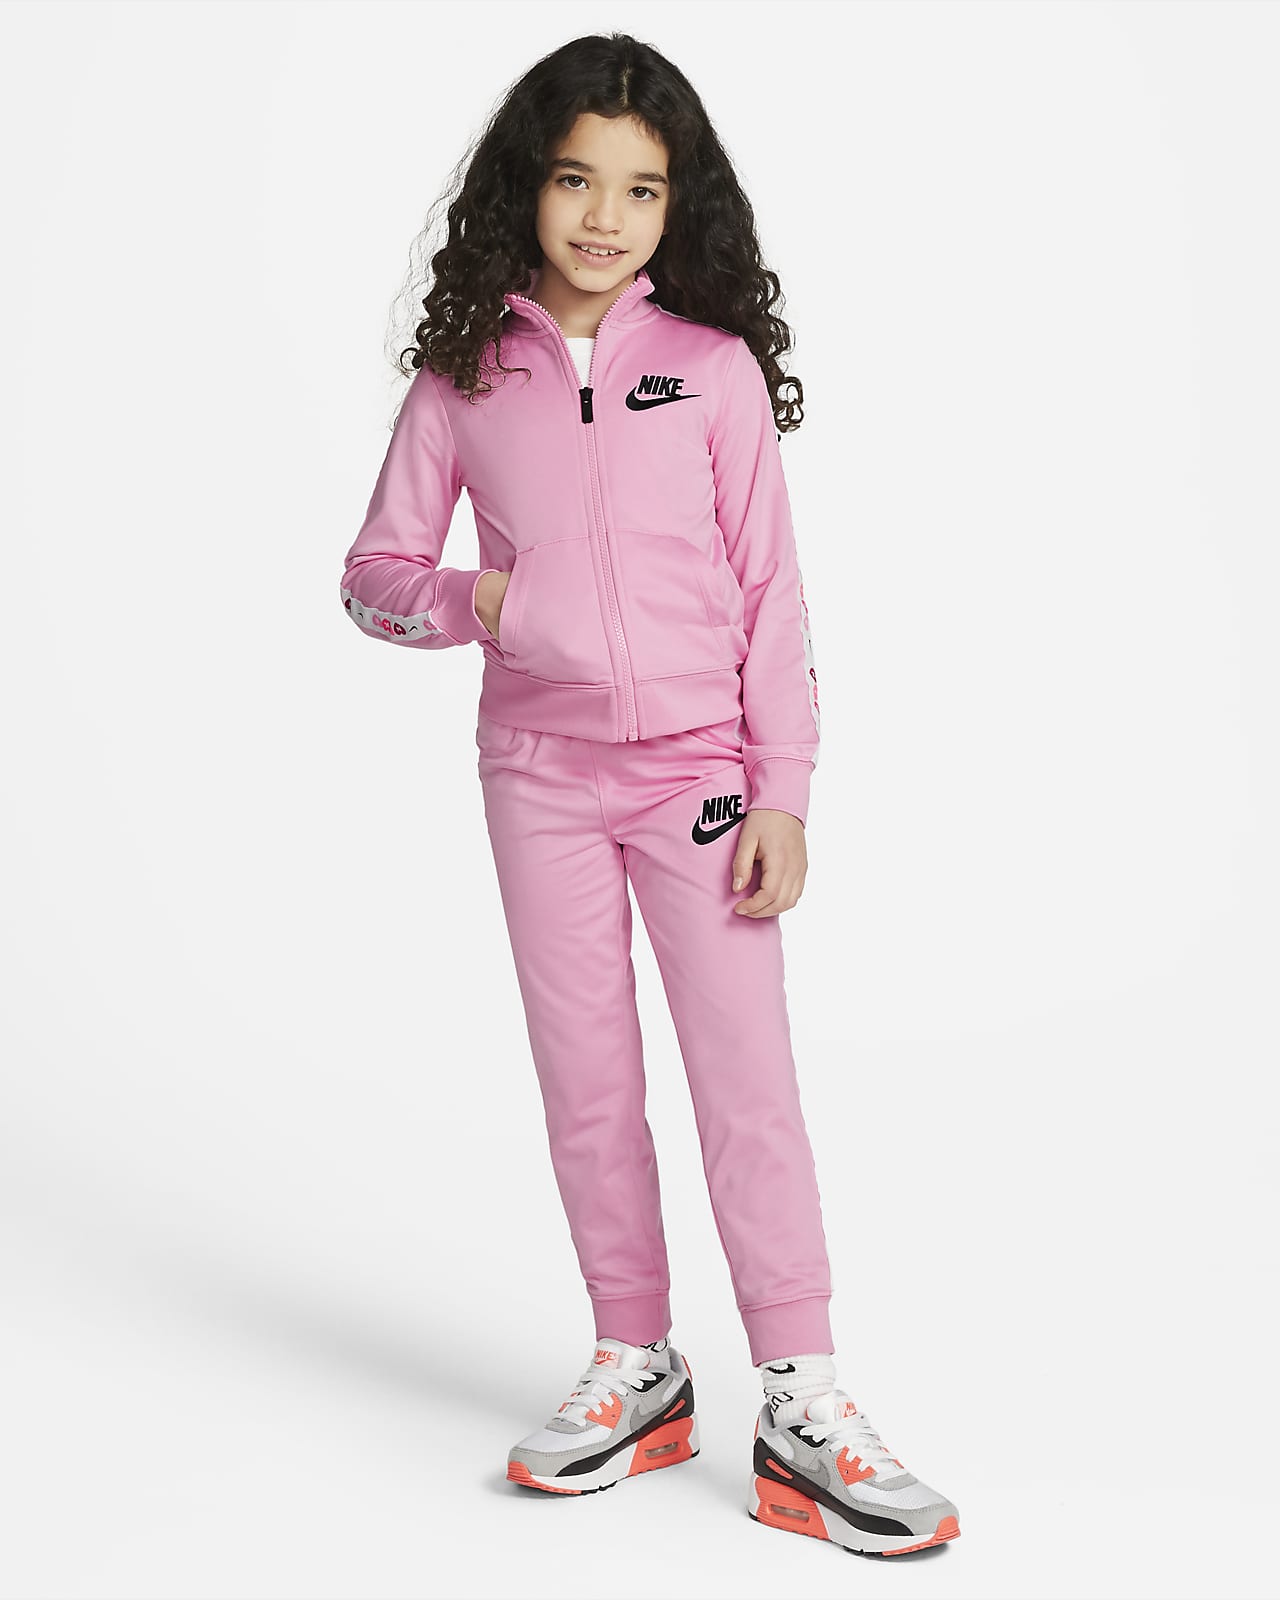 nike track suit for kids